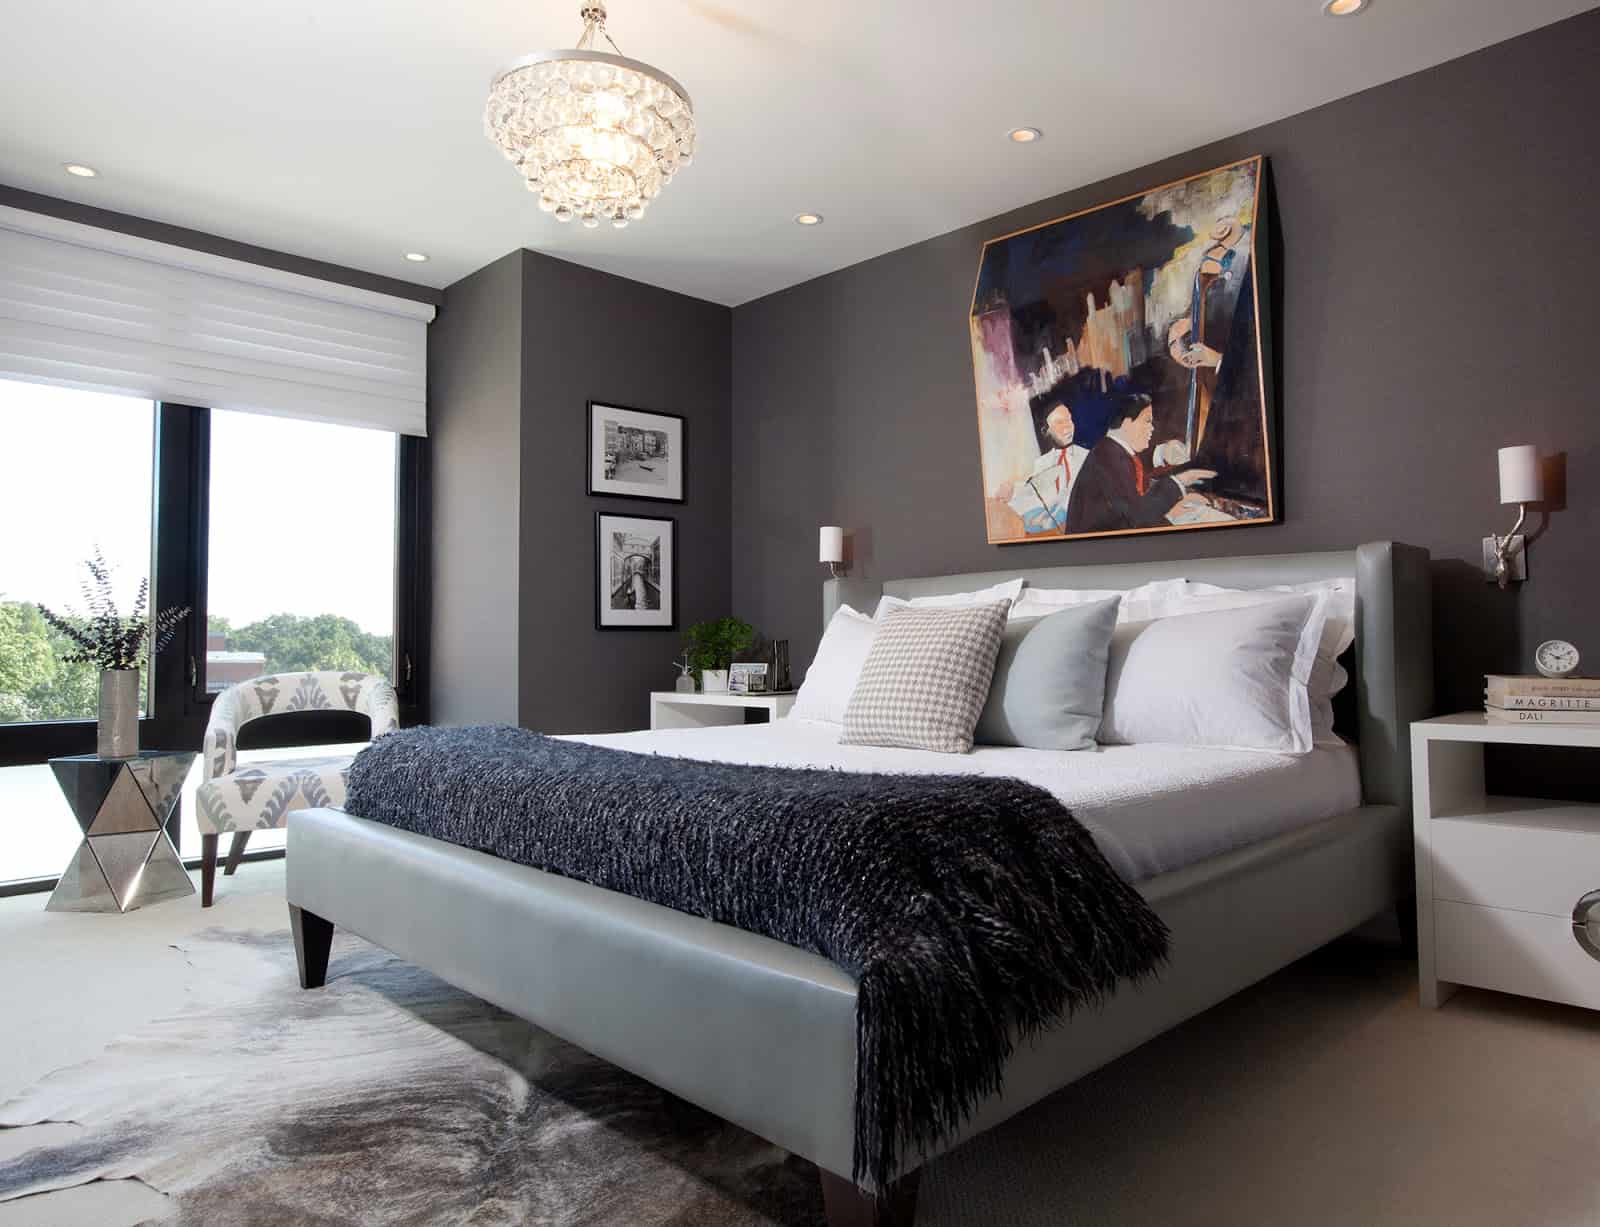 7 Tips for Decorating your Bedroom